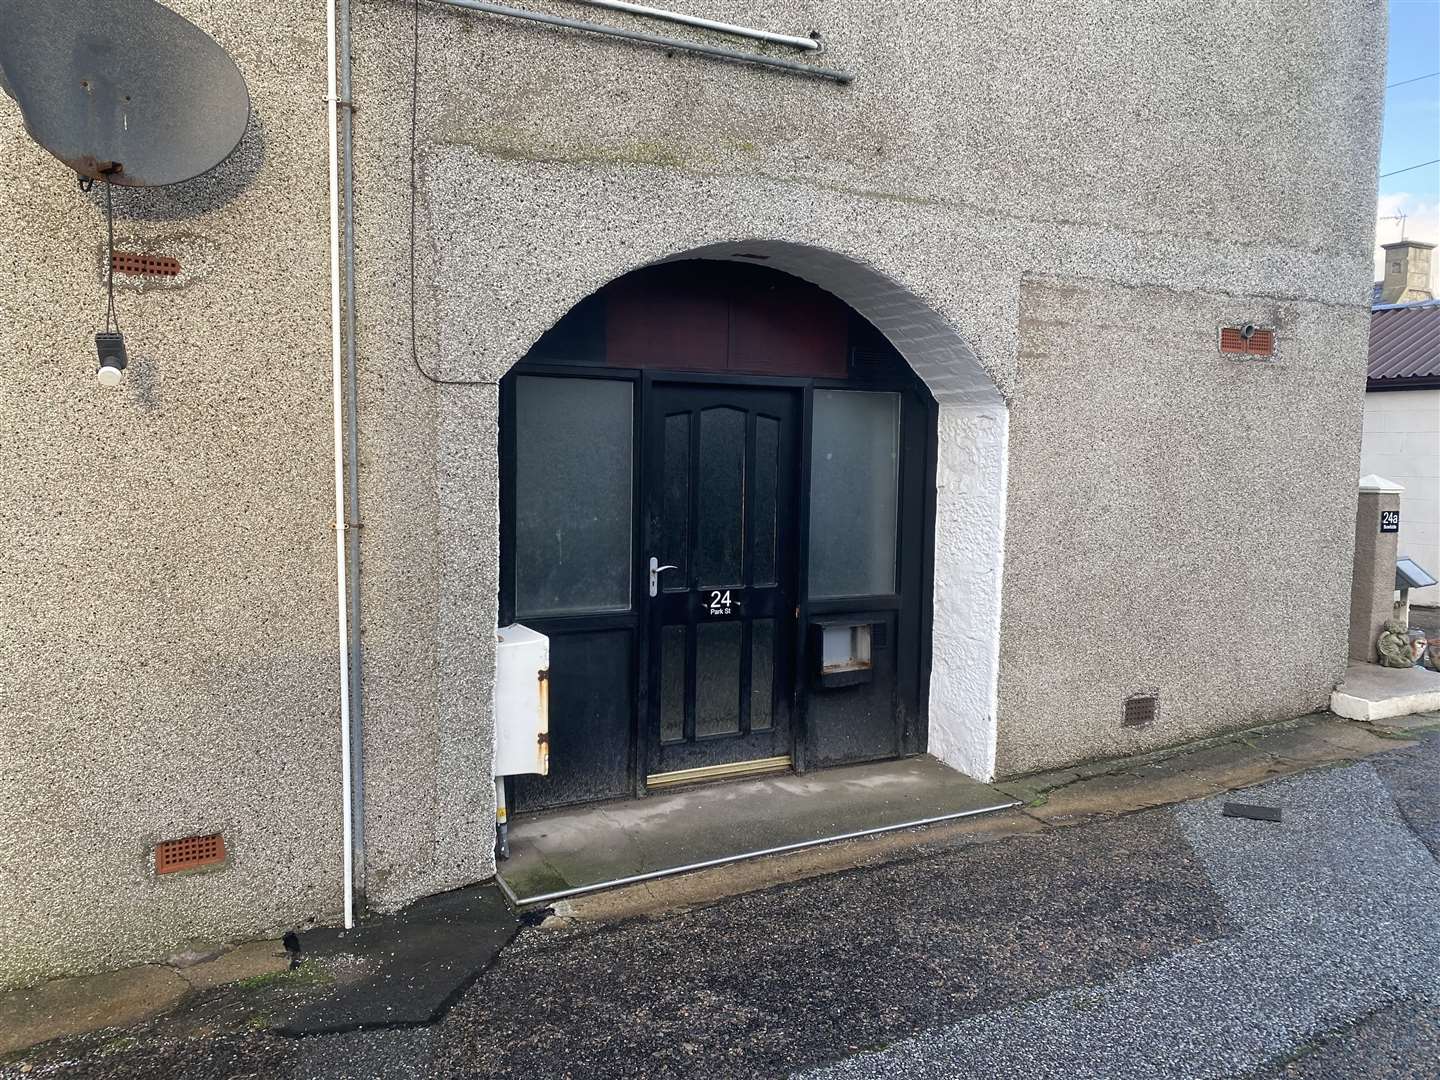 Plans have been lodged to turn this former hairdressing salon in Portknockie into a one bedroom flat.